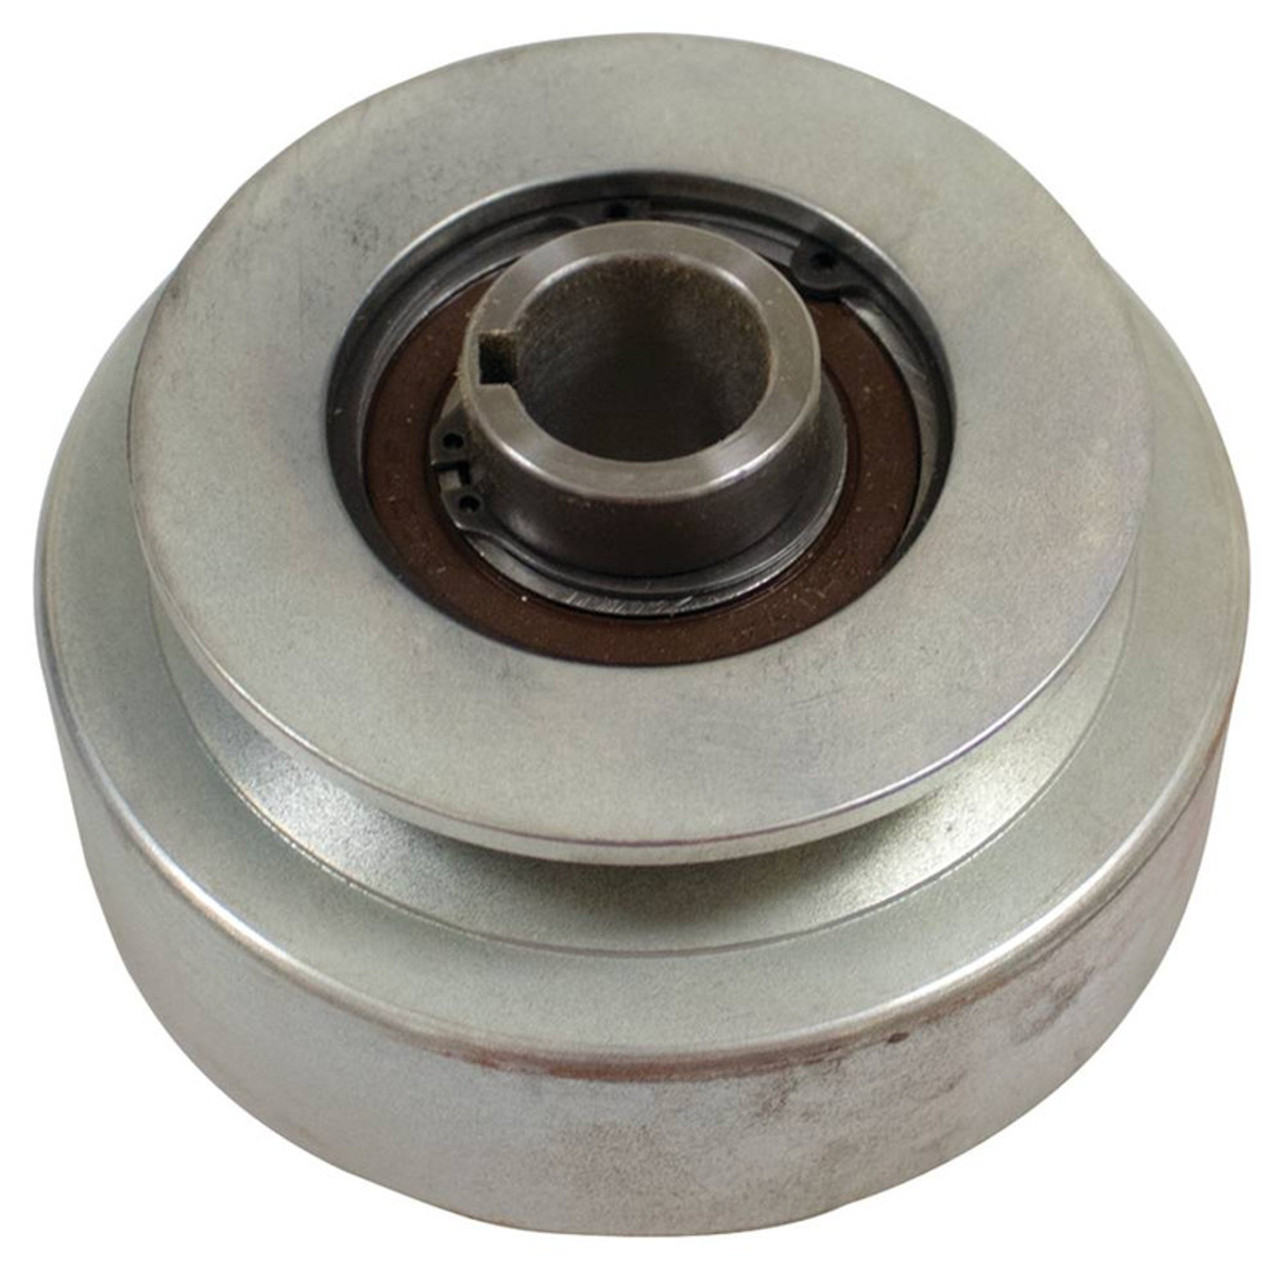 Noram Pulley Clutch 160021 1" Bore for 3 HP to 10 HP Ball Bearing Style Hub for Smooth Running